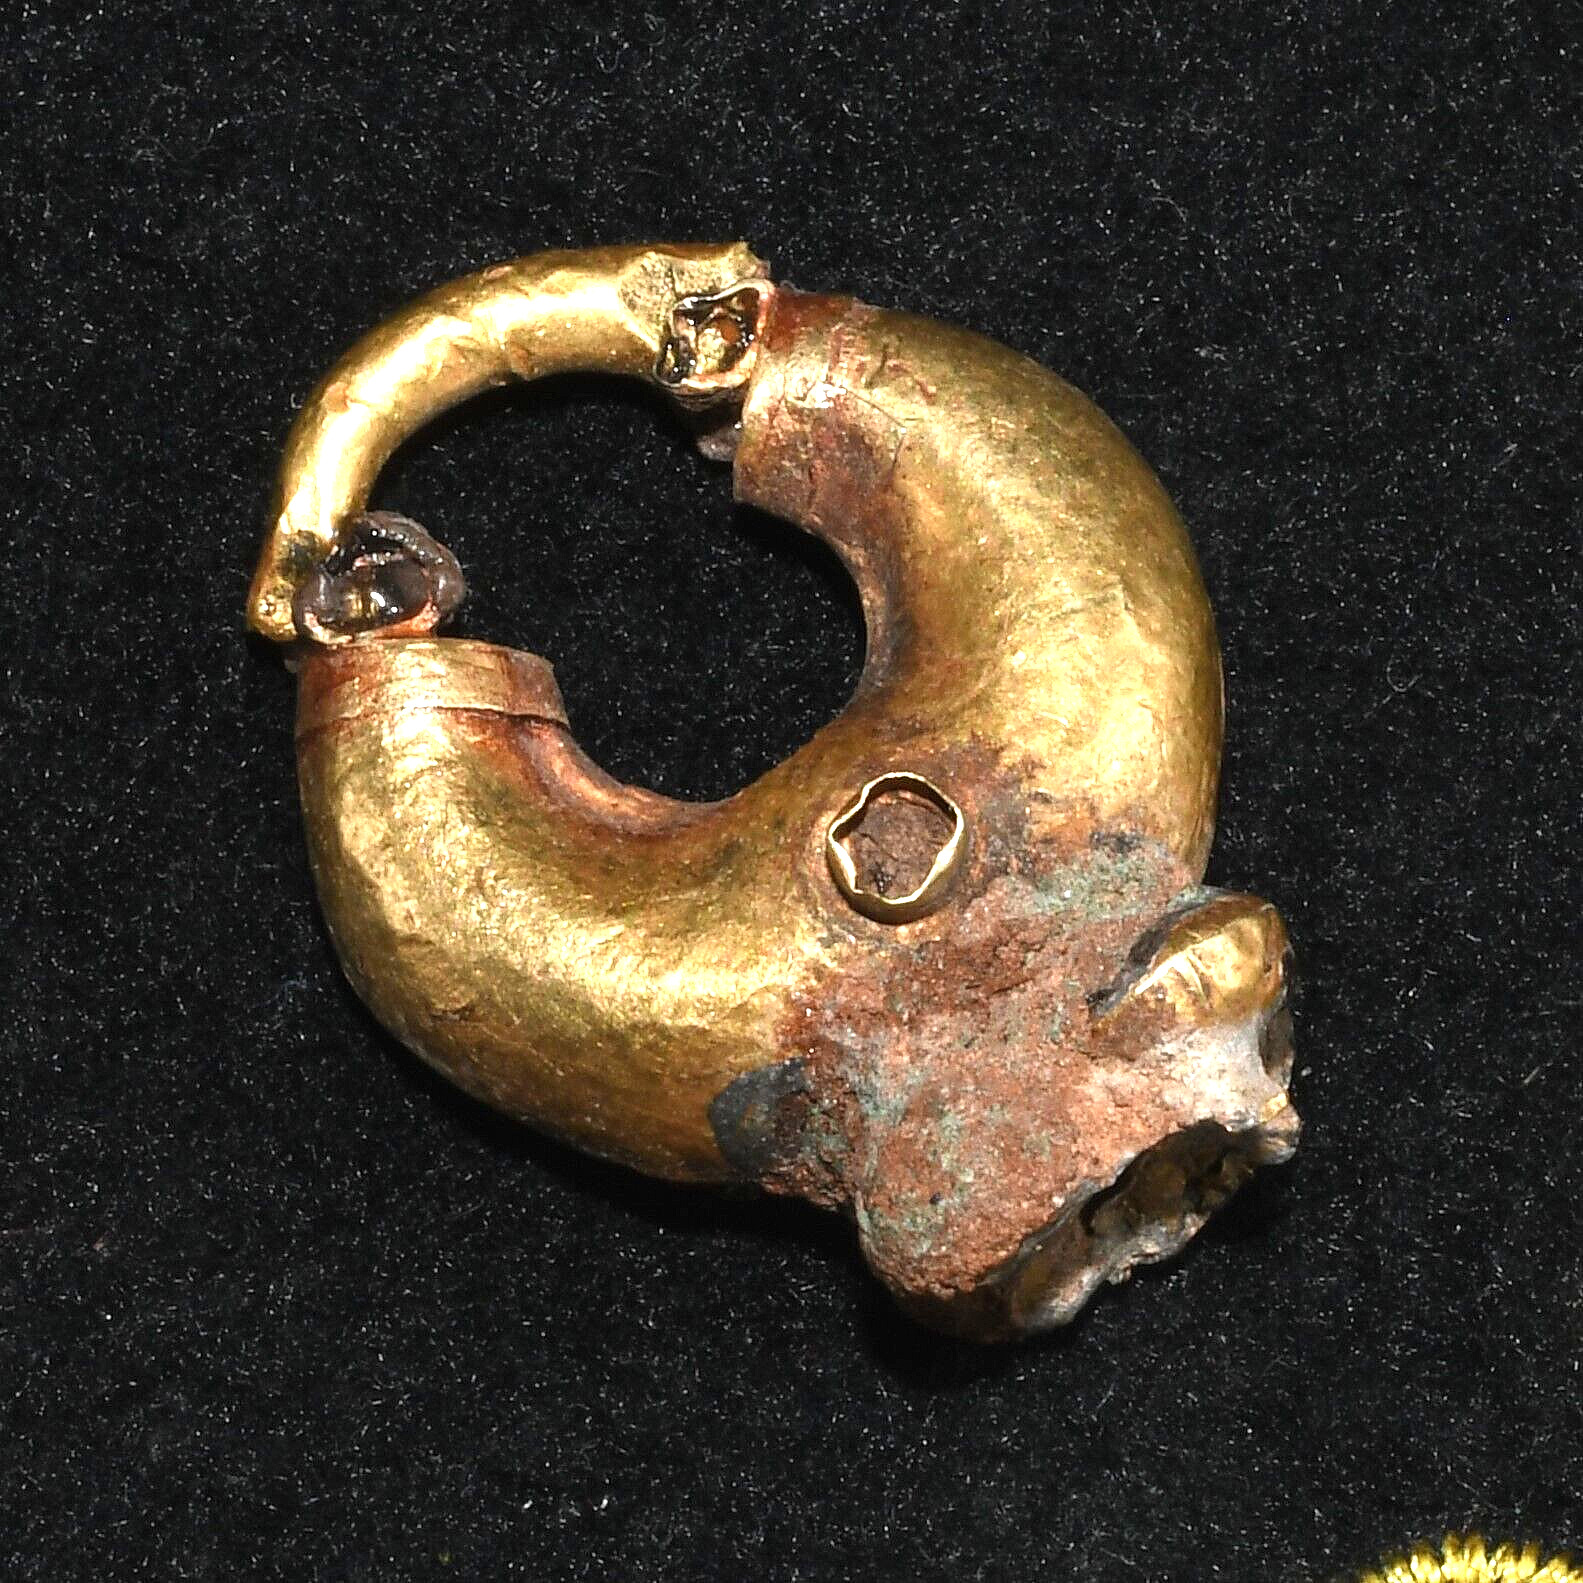 Large Ancient Hellenistic Greek Gold Earring in Good Condition Circa 500- 400 BC